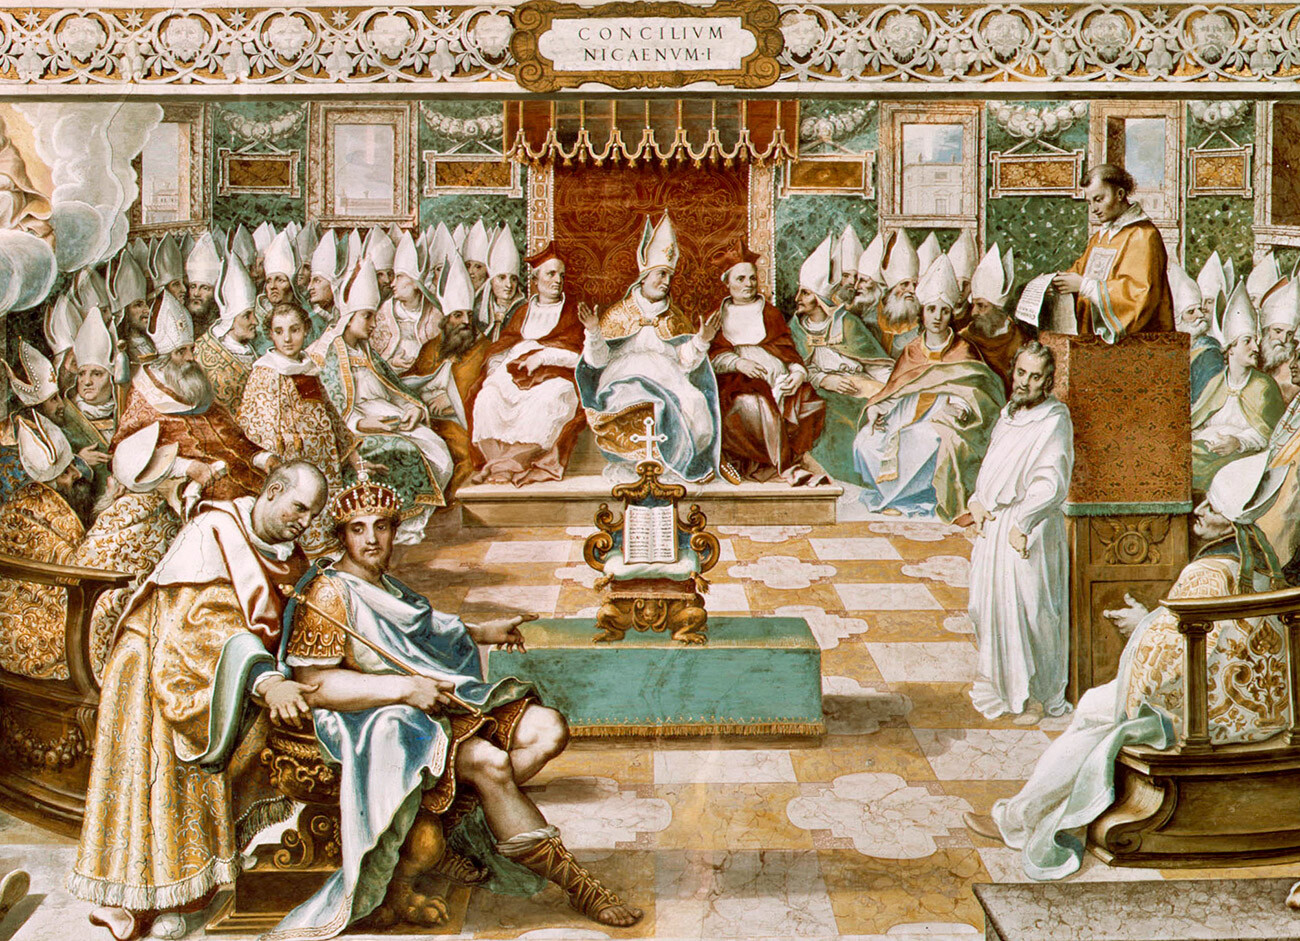 A fresco depicting the First Council of Nicaea at the Vatican's Sixtine Salon